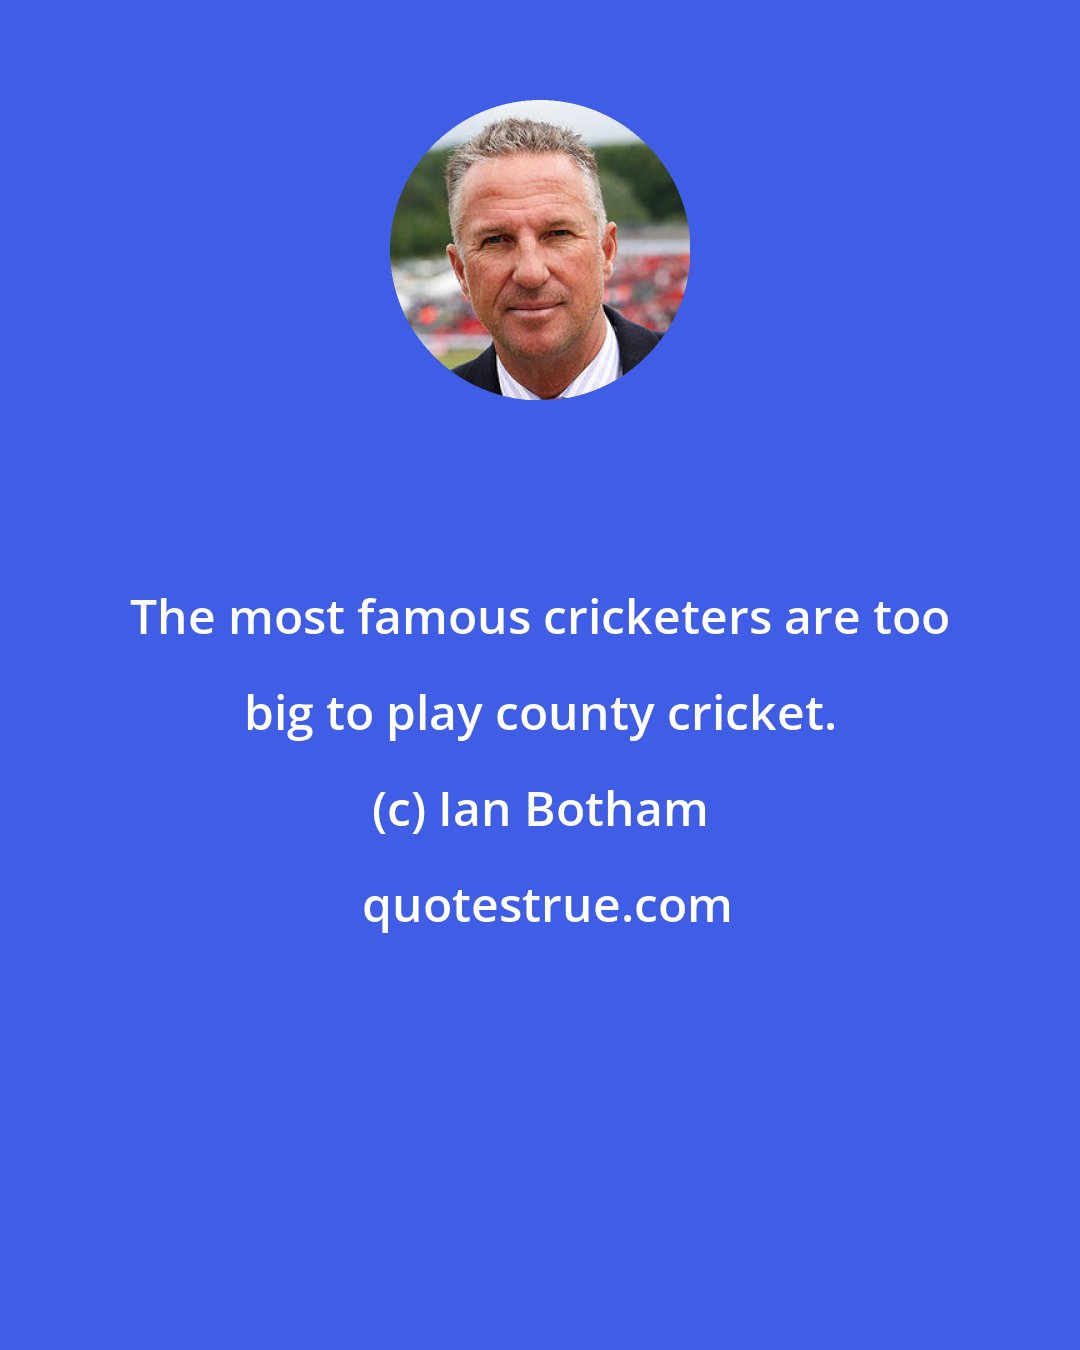 Ian Botham: The most famous cricketers are too big to play county cricket.